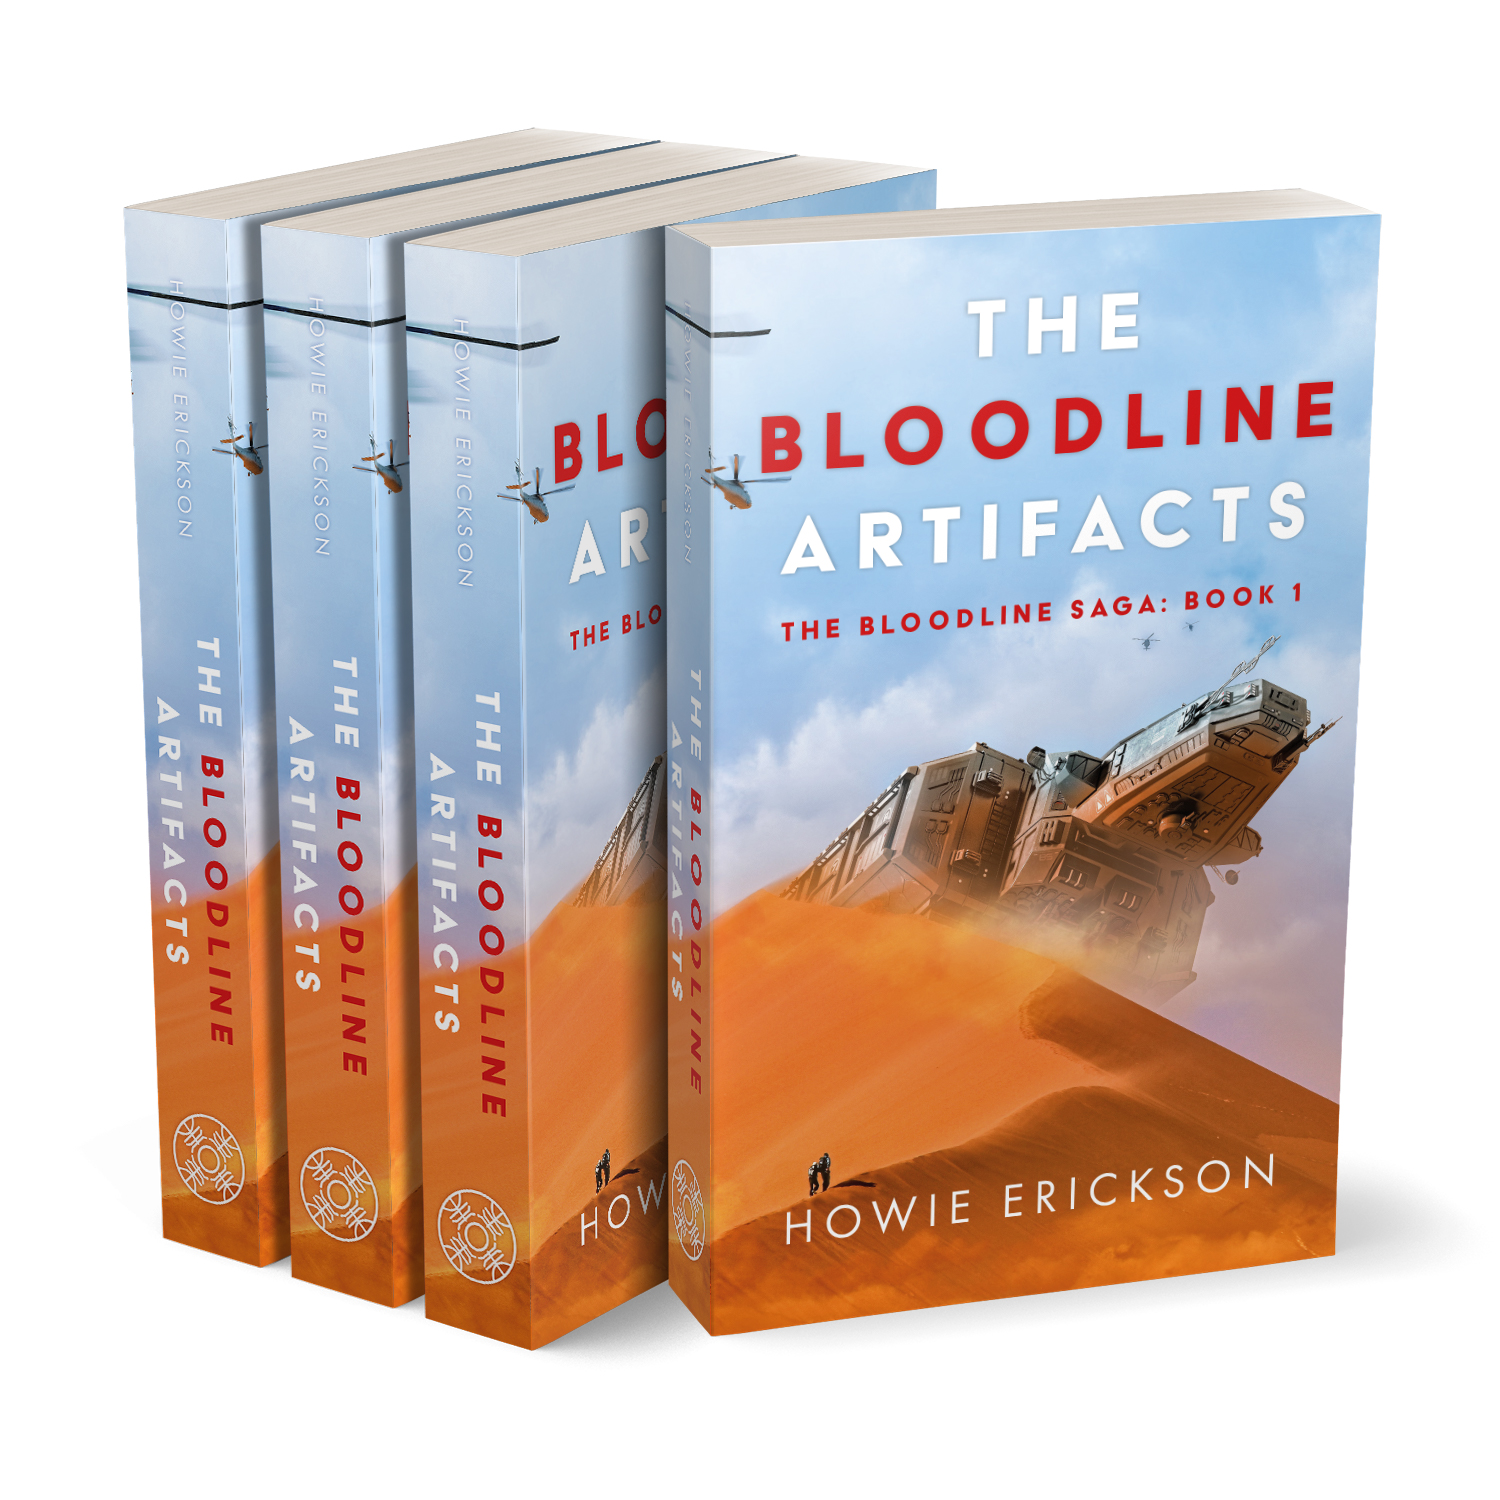 'The Bloodline Artifacts' is book one in a great dual-world scifi thriller series, by author Howie Erickson. The book cover was designed by Mark Thomas, of coverness.com. To find out more about my book design services, please visit www.coverness.com.